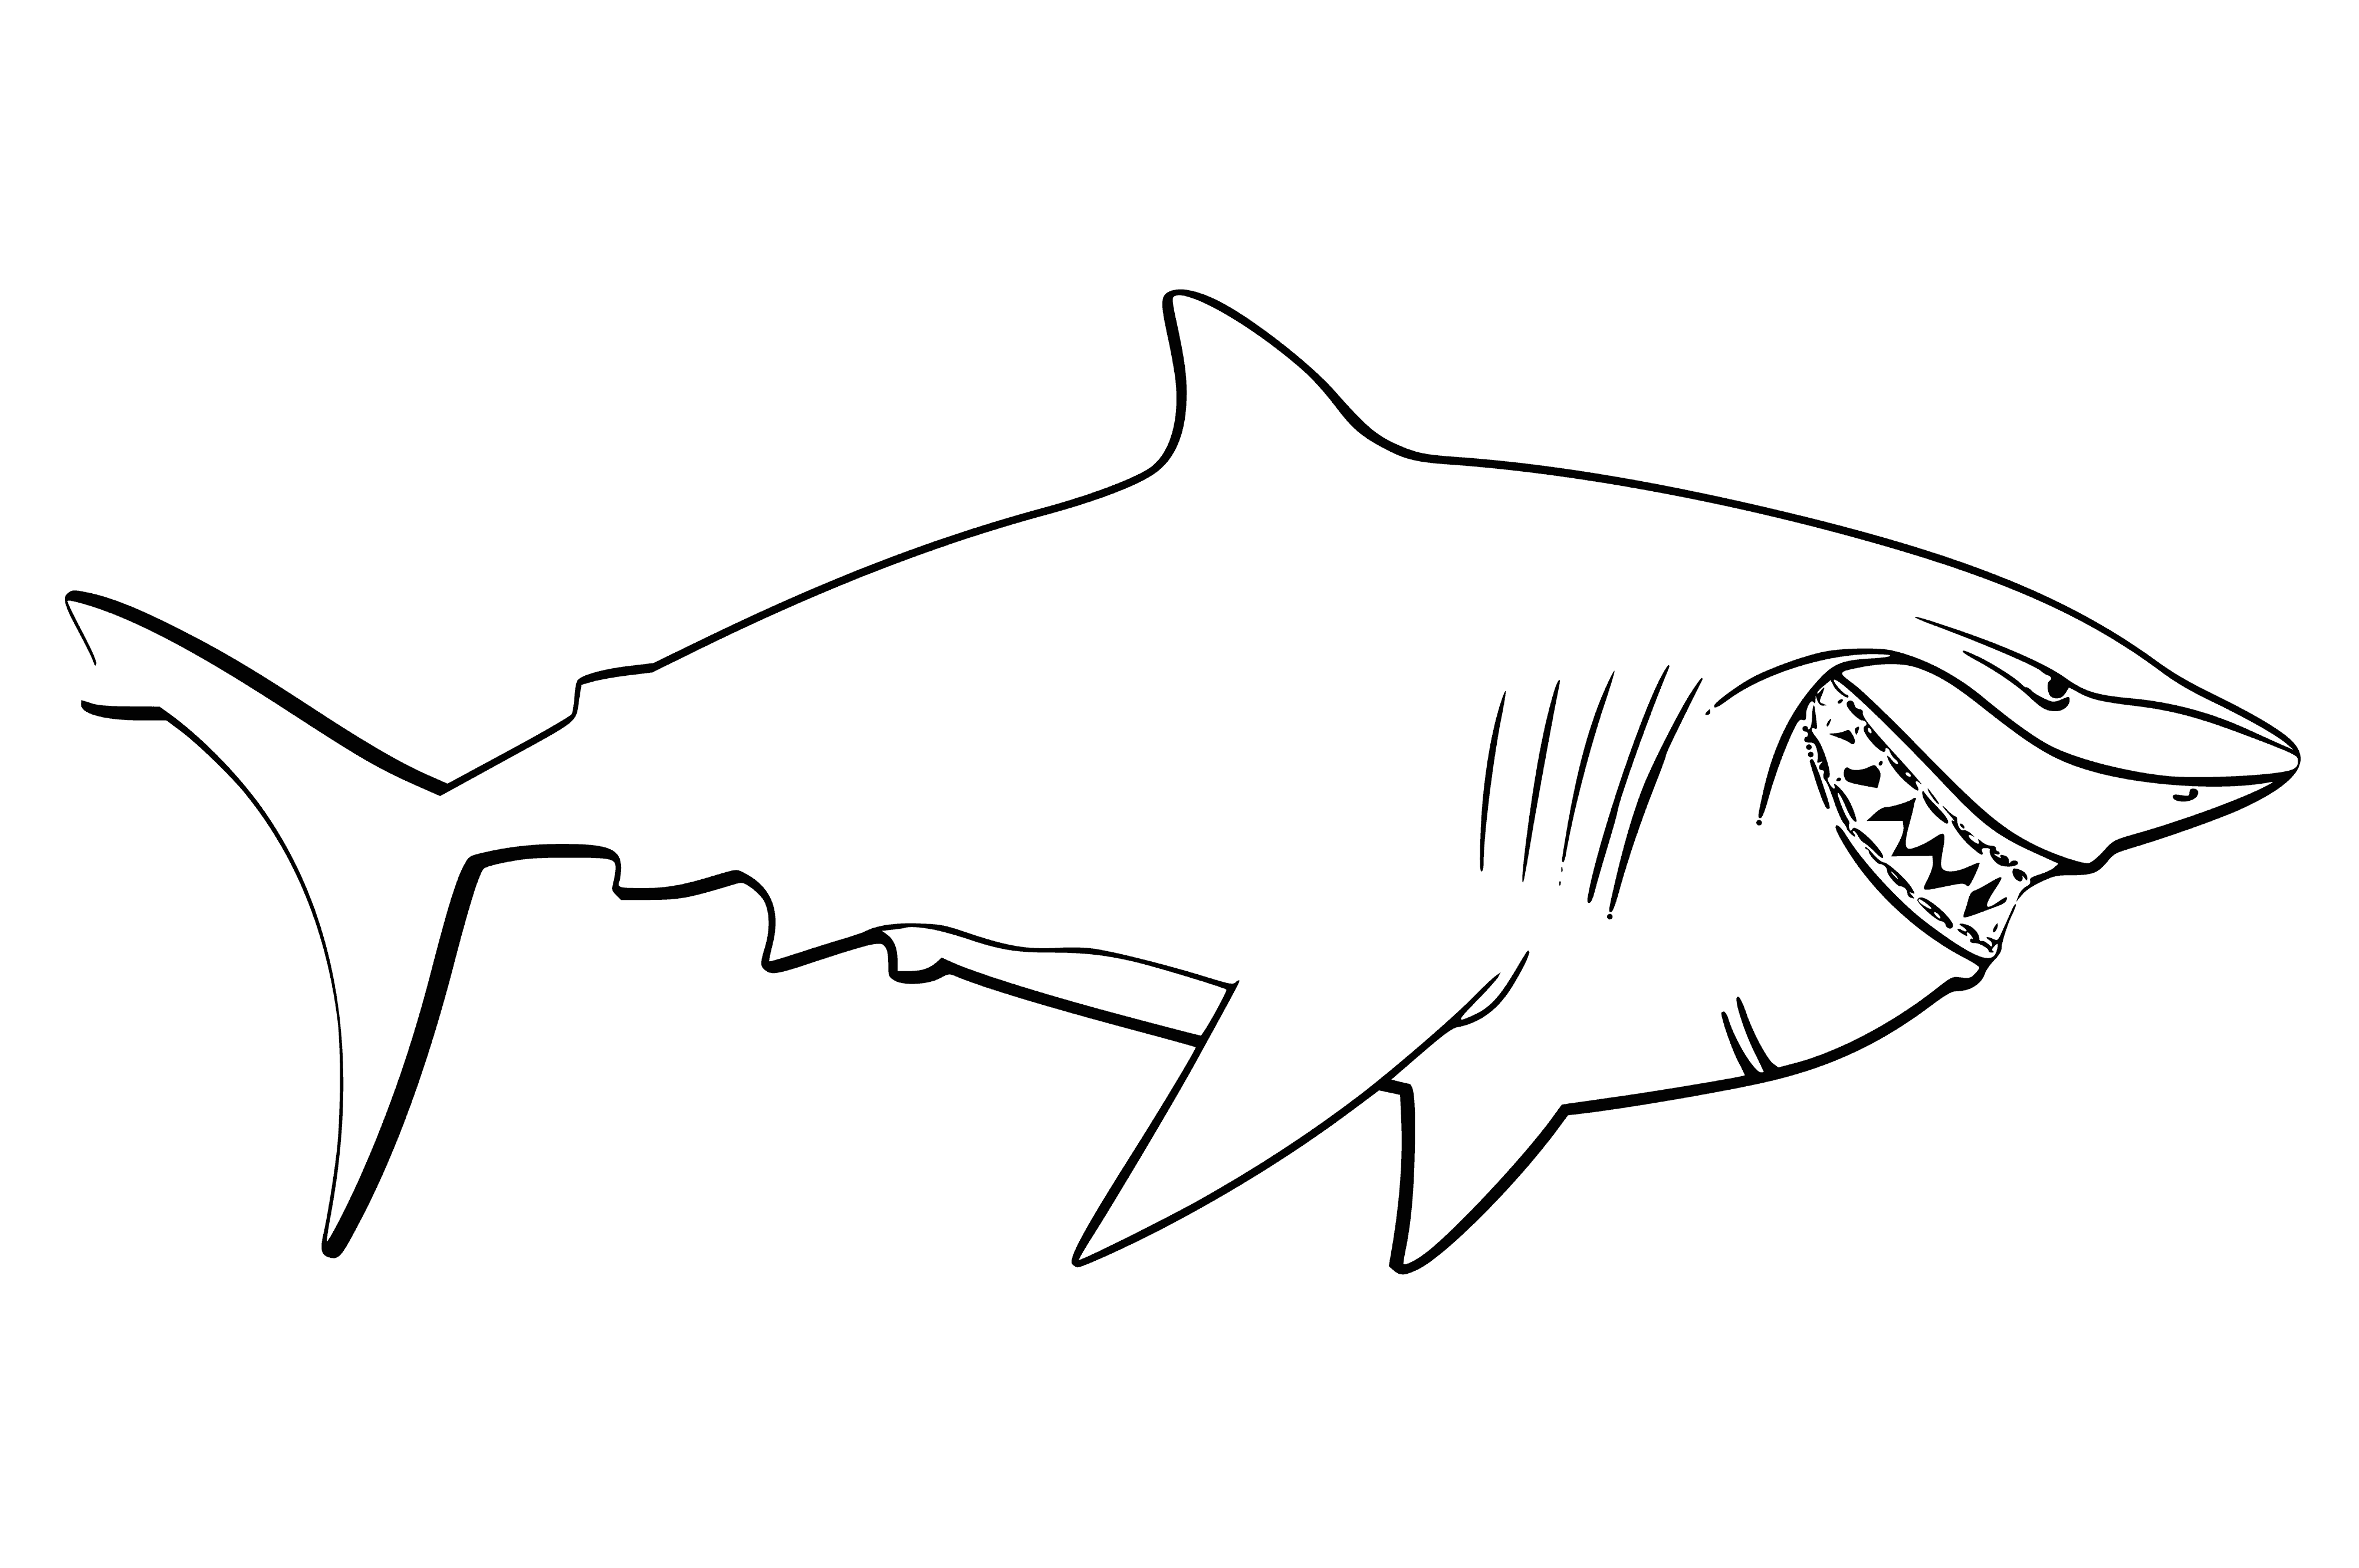 coloring page: A fierce grey shark with sharp teeth and dark fins swims towards the viewer with small black eyes.